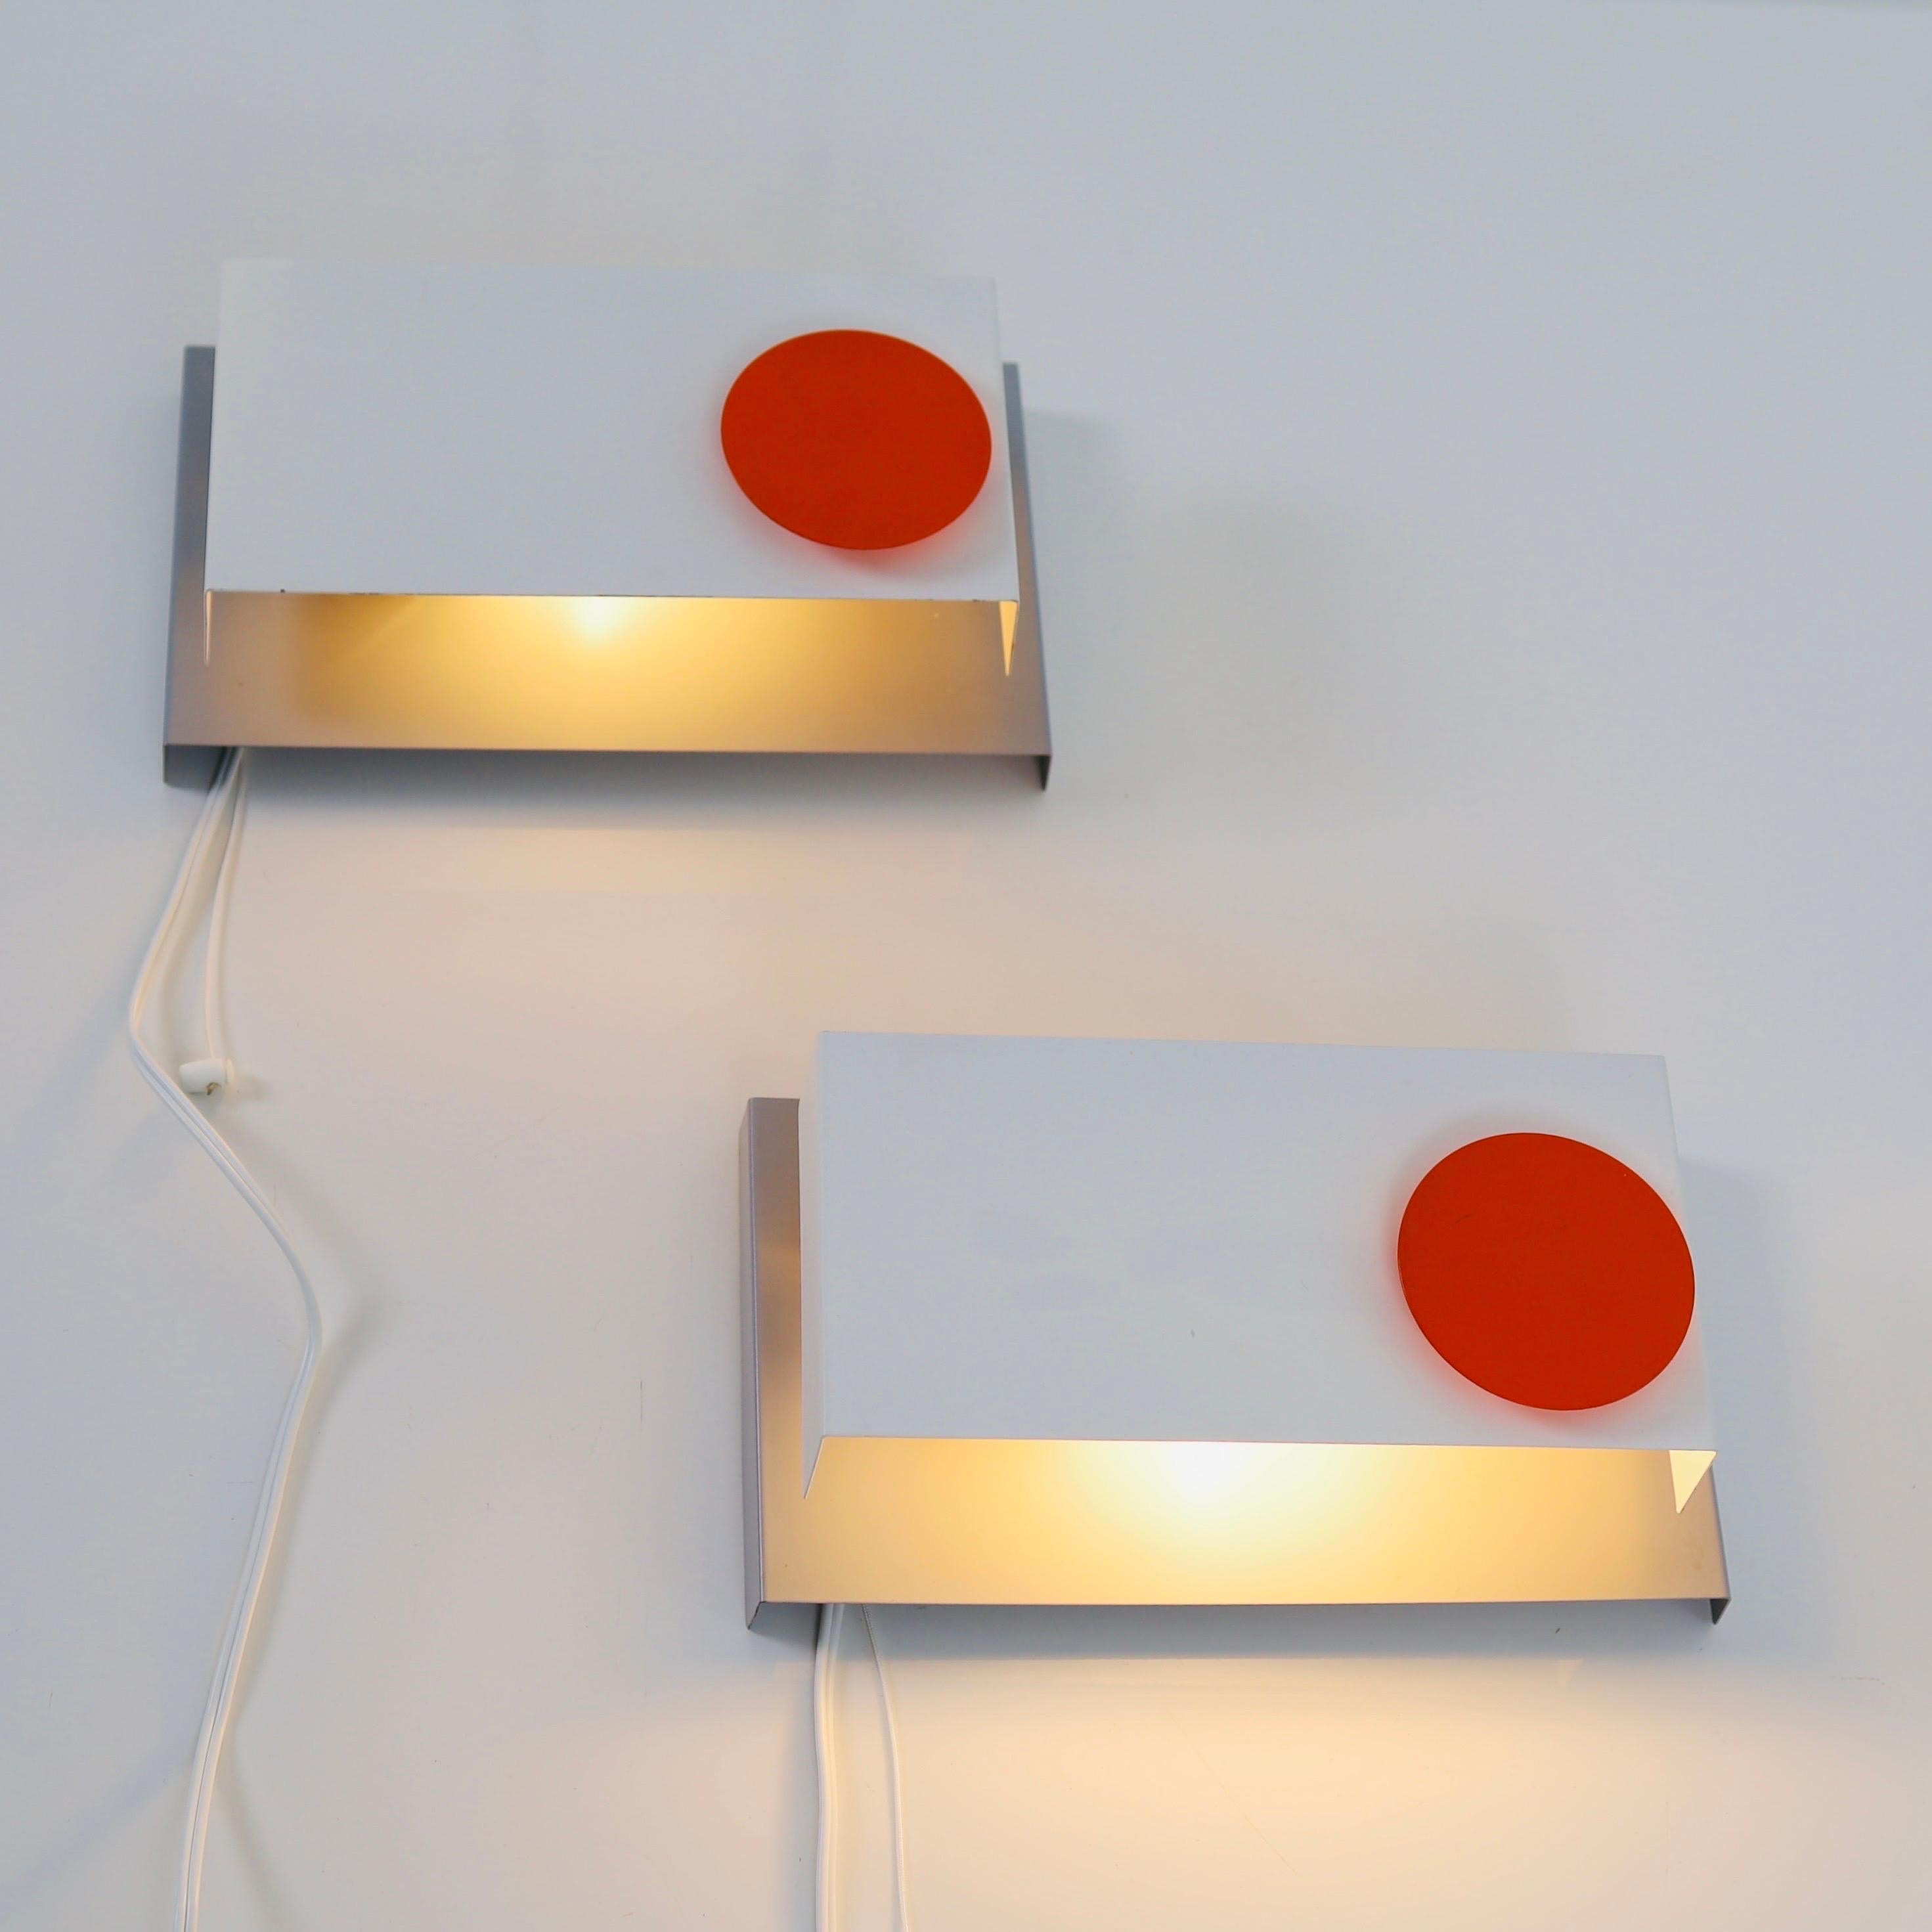 A set of bed lamps designed by Svend Aage Holm Sørensen in the 1960s. It is a rare set in great vintage condition.

* A pair (2) of gray, white and orange night lamps with pull-switch. Tipping function to adjust light.
* Designer: Svend Aage Holm